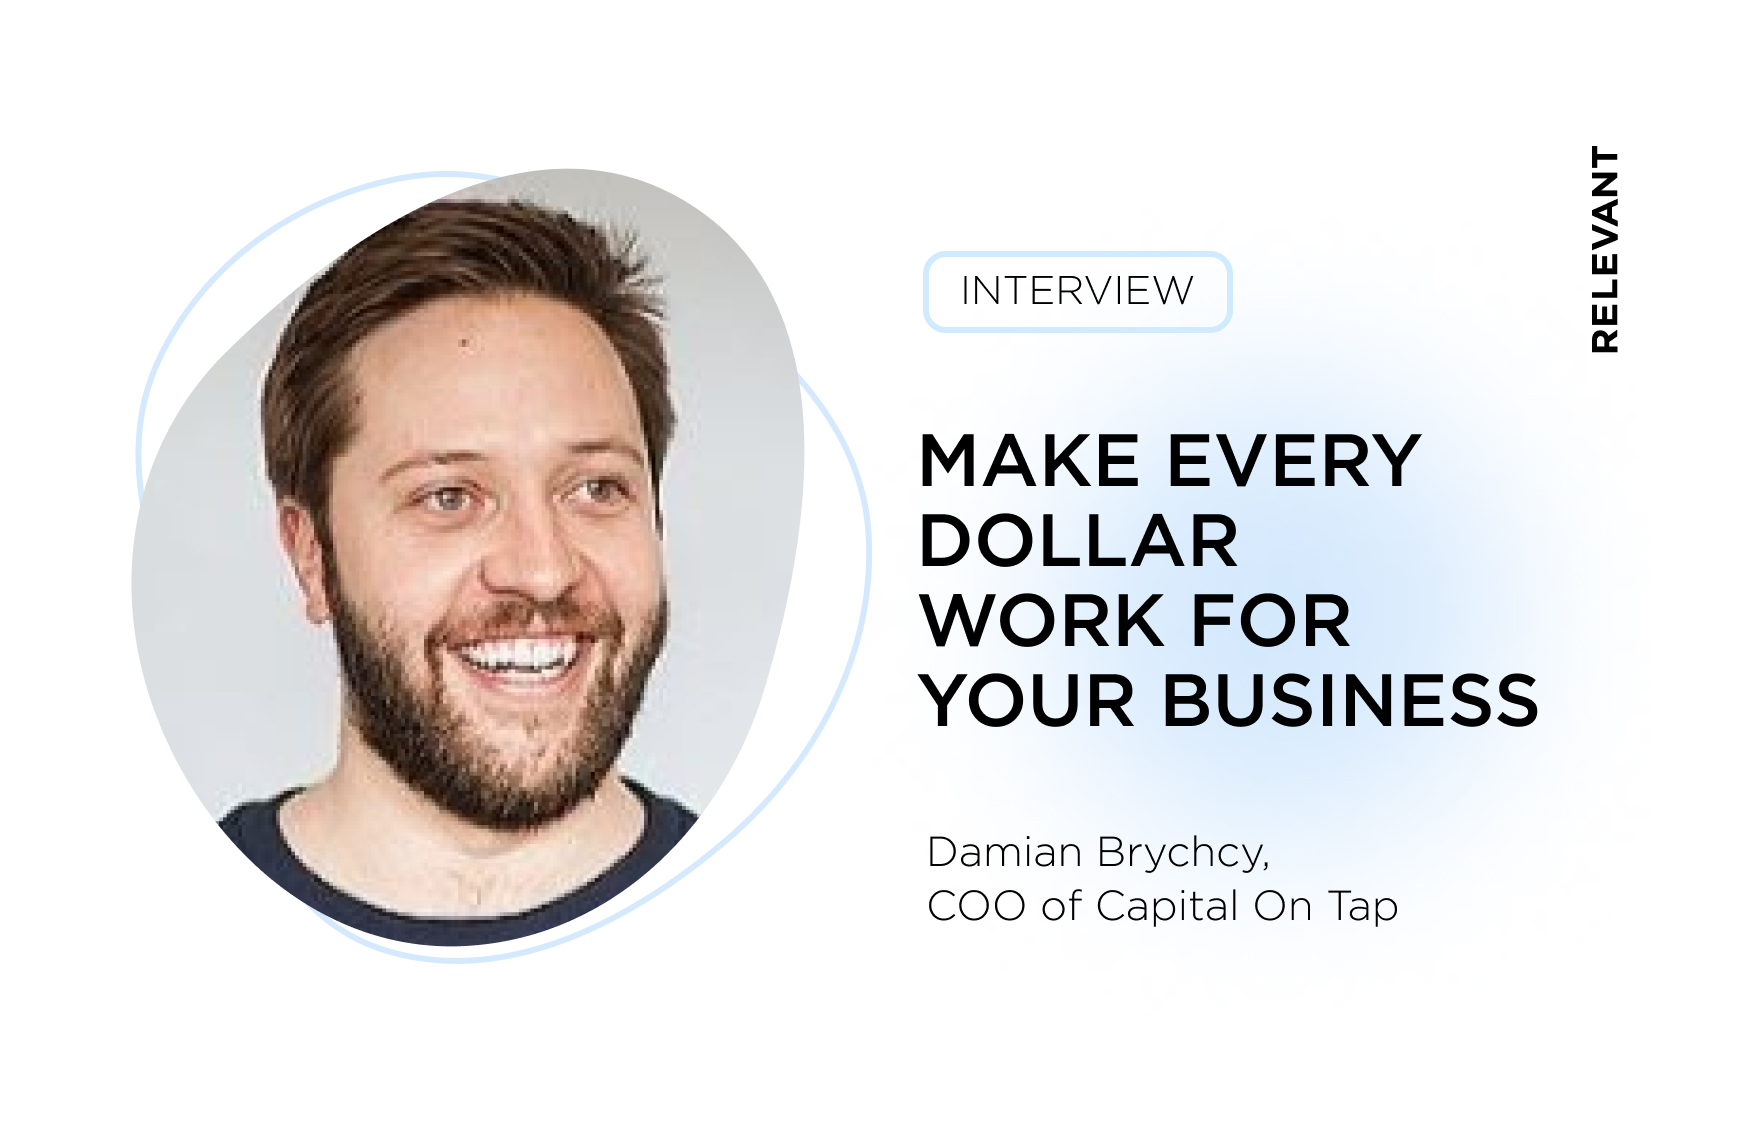 How to Build a Fintech Product with 150 000 Customers—Damian Brychcy, COO of Capital On Tap